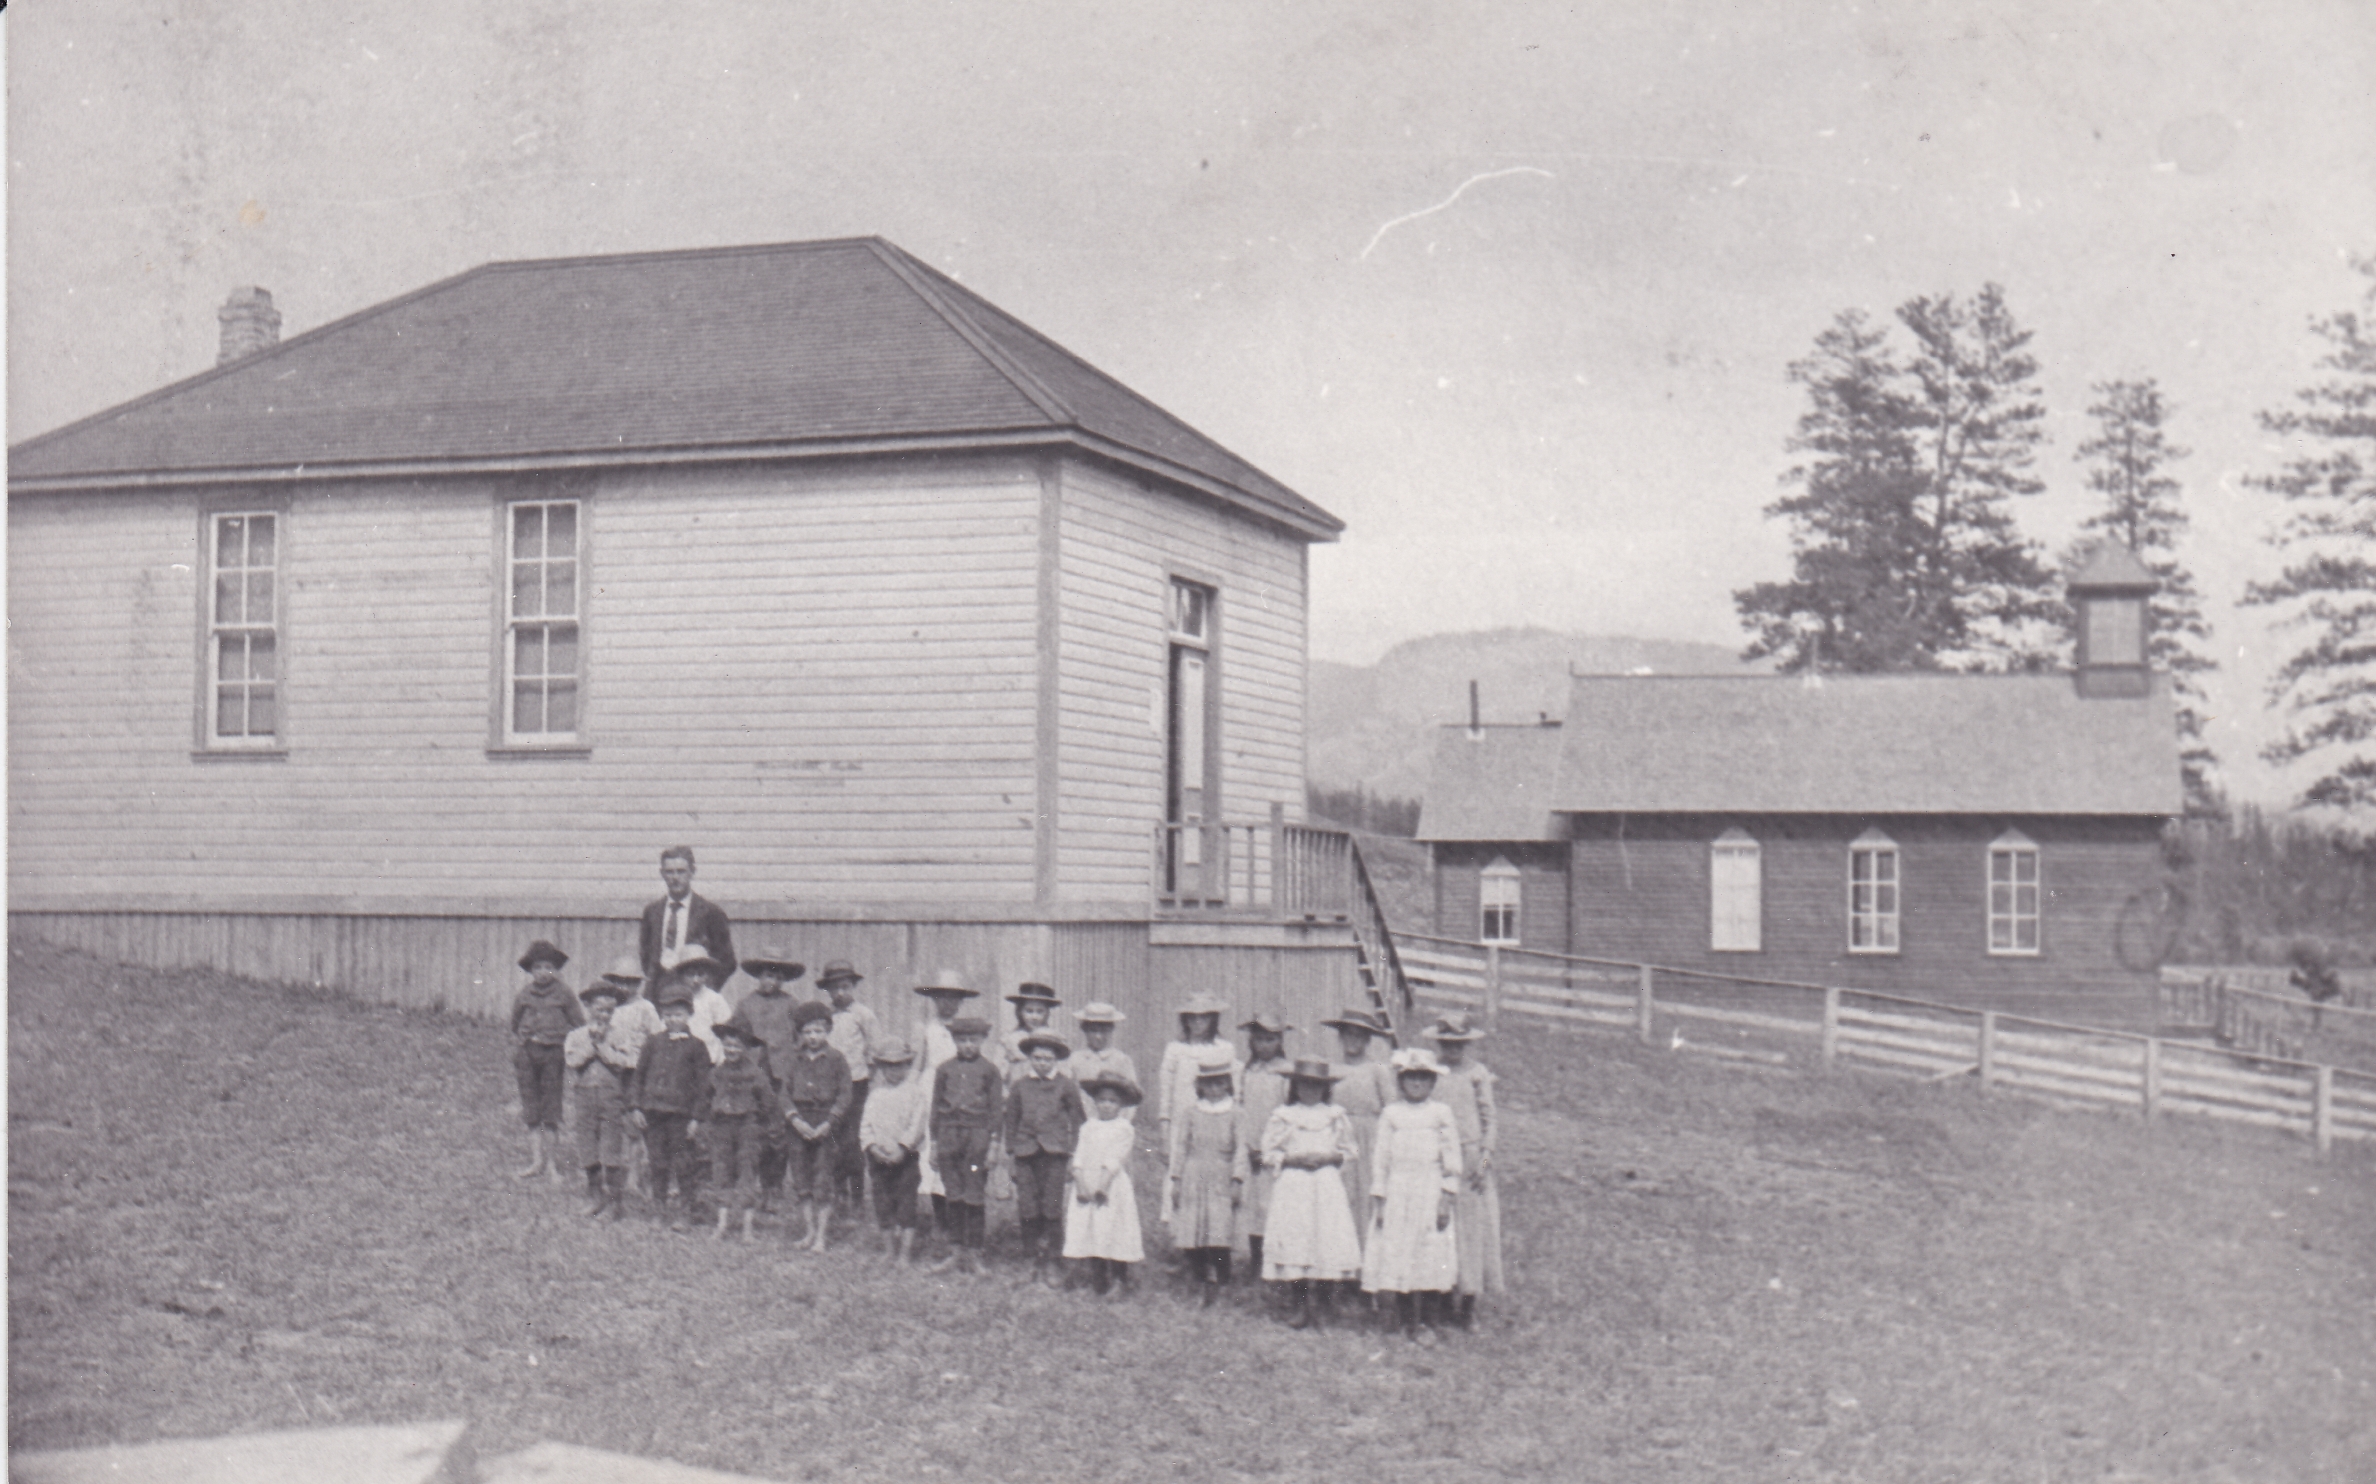 A group of pioneer children and their teacher are standing outside a wooden school. All of the children are wearing hats. Next to the school is a wooden church.